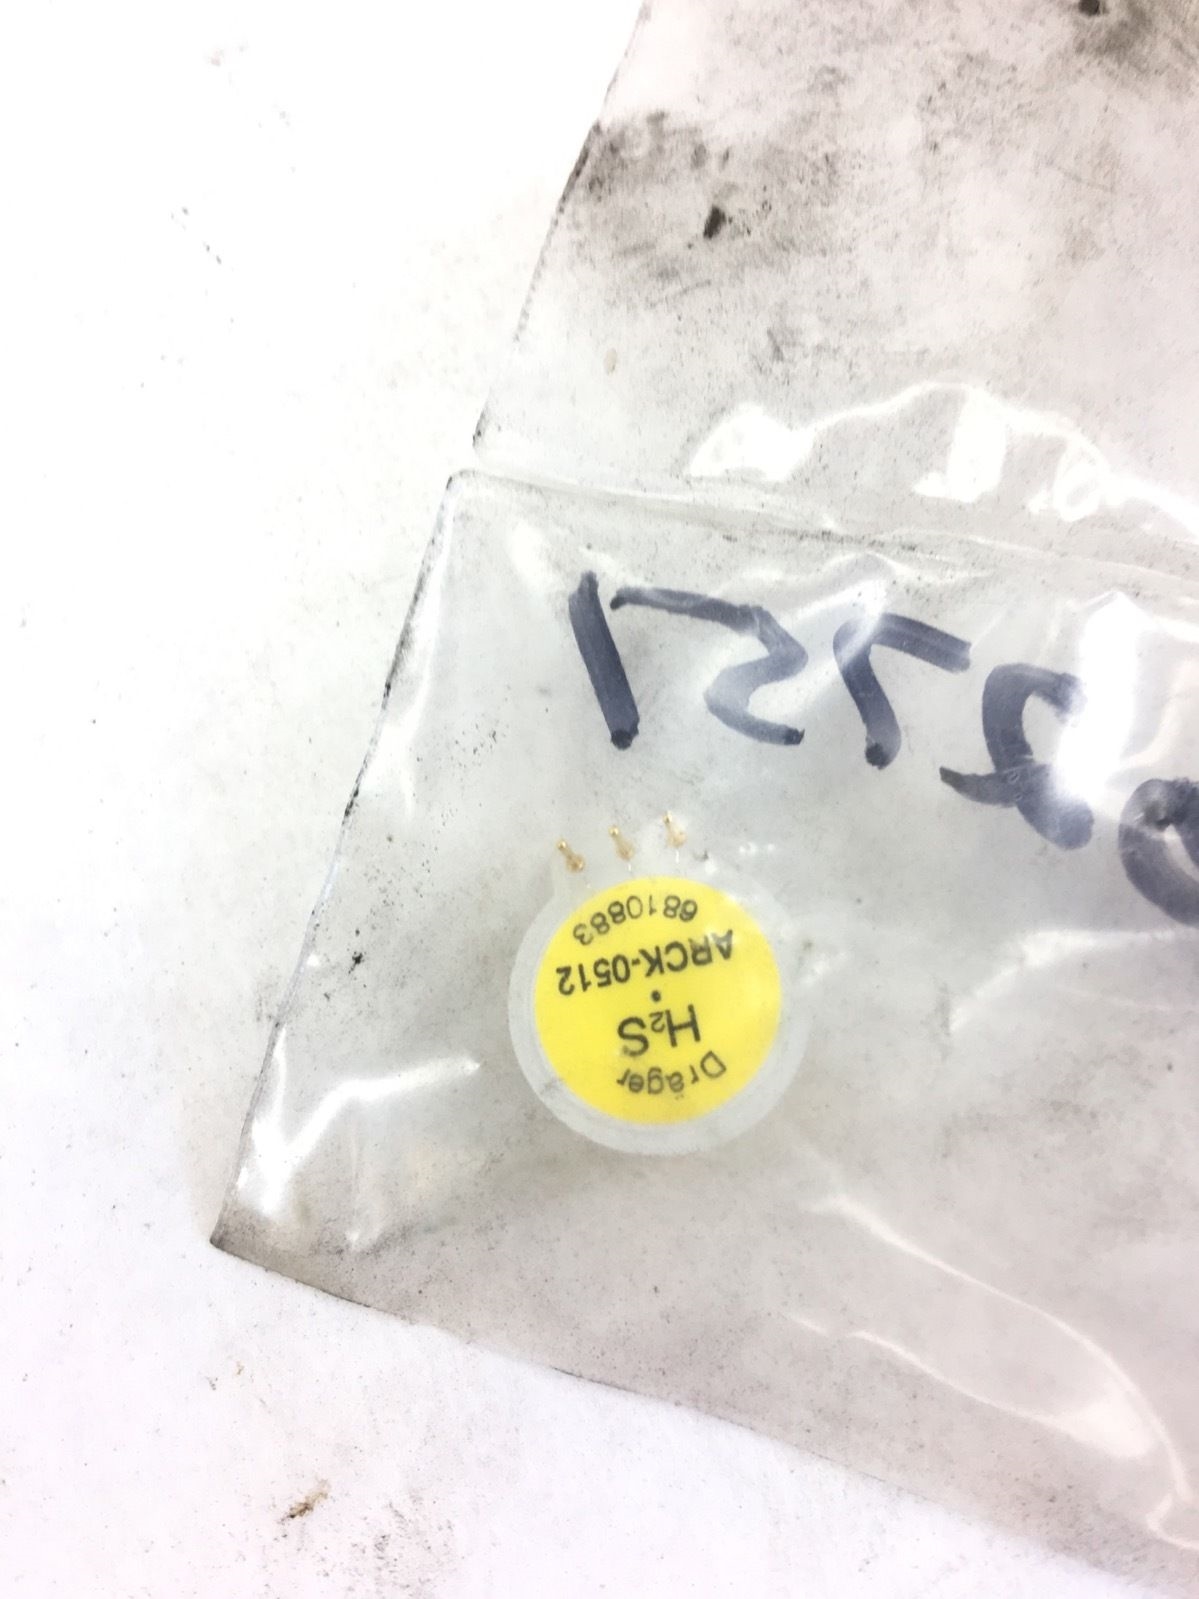 NEW DRAGER H2S 6810883 REPLACEMENT SENSOR, HYDROGEN SULFIDE, FAST SHIP! (H226) 2